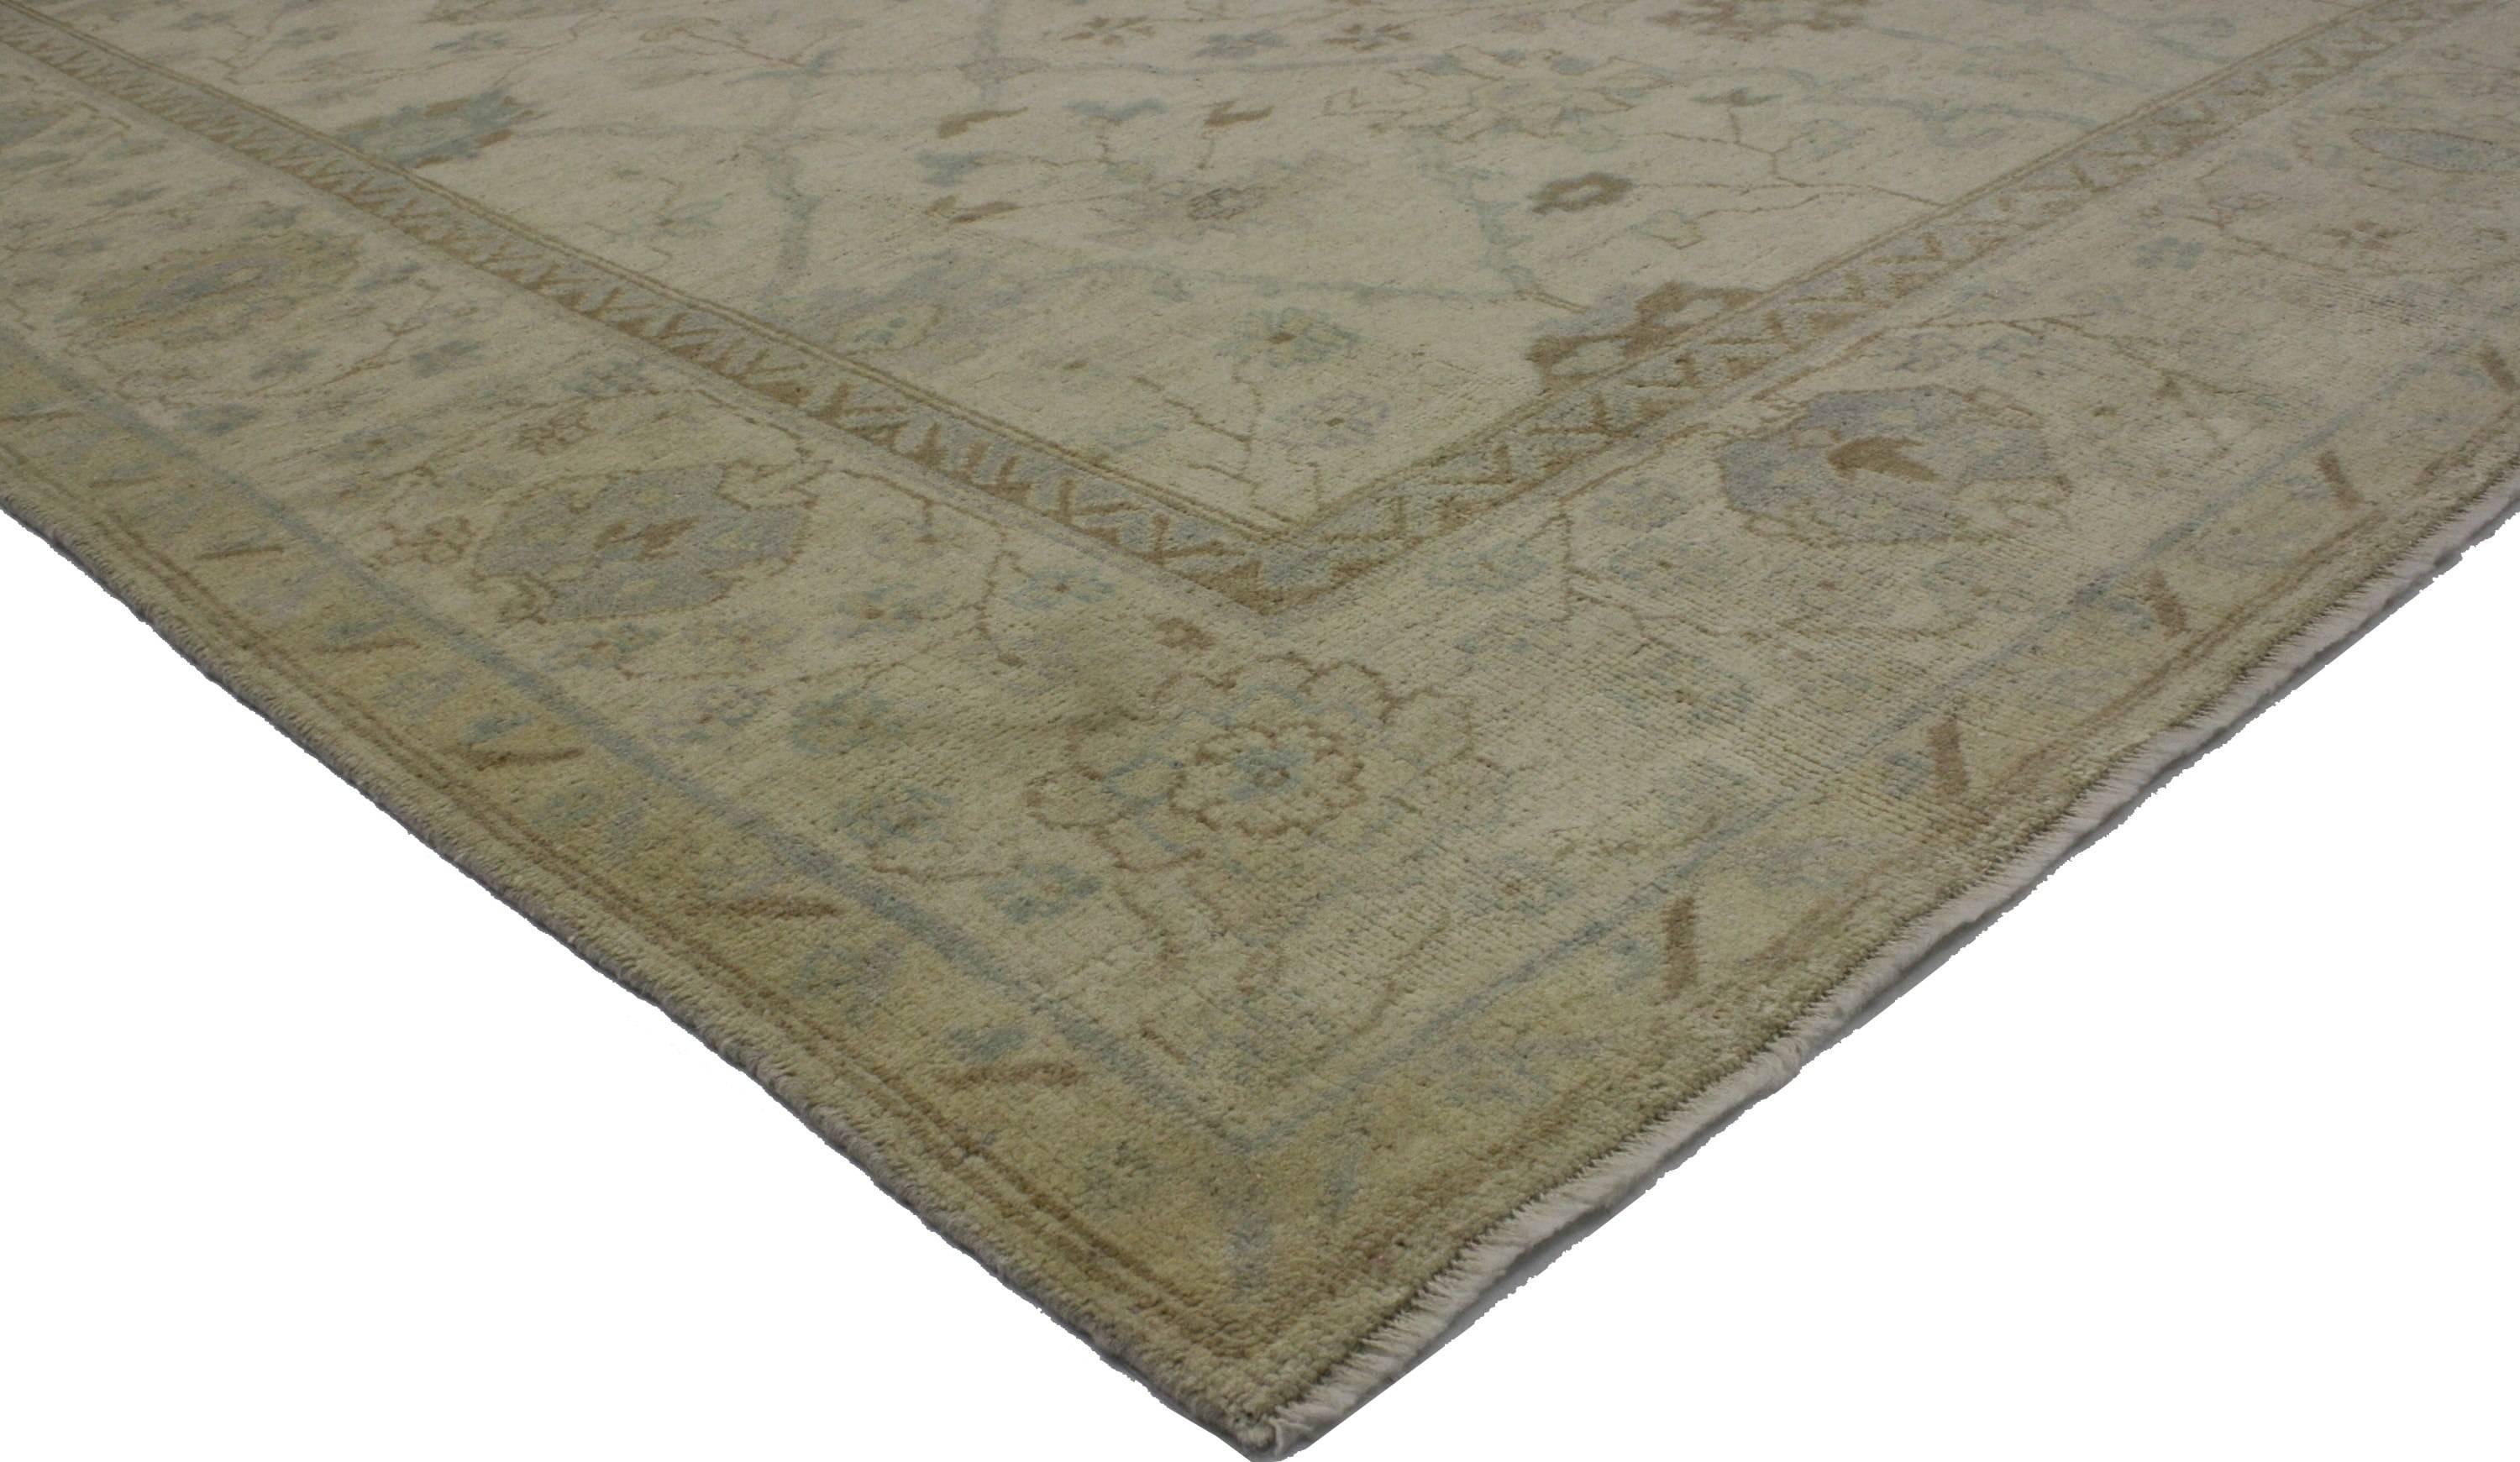 30199 New Contemporary Oushak Area Rug with Coastal Cottage Style 08'00 X 09'02. Blending Coastal Cottage style and elements from the modern world, this hand knotted wool contemporary Oushak rug beautifully balances new and old. It features an all